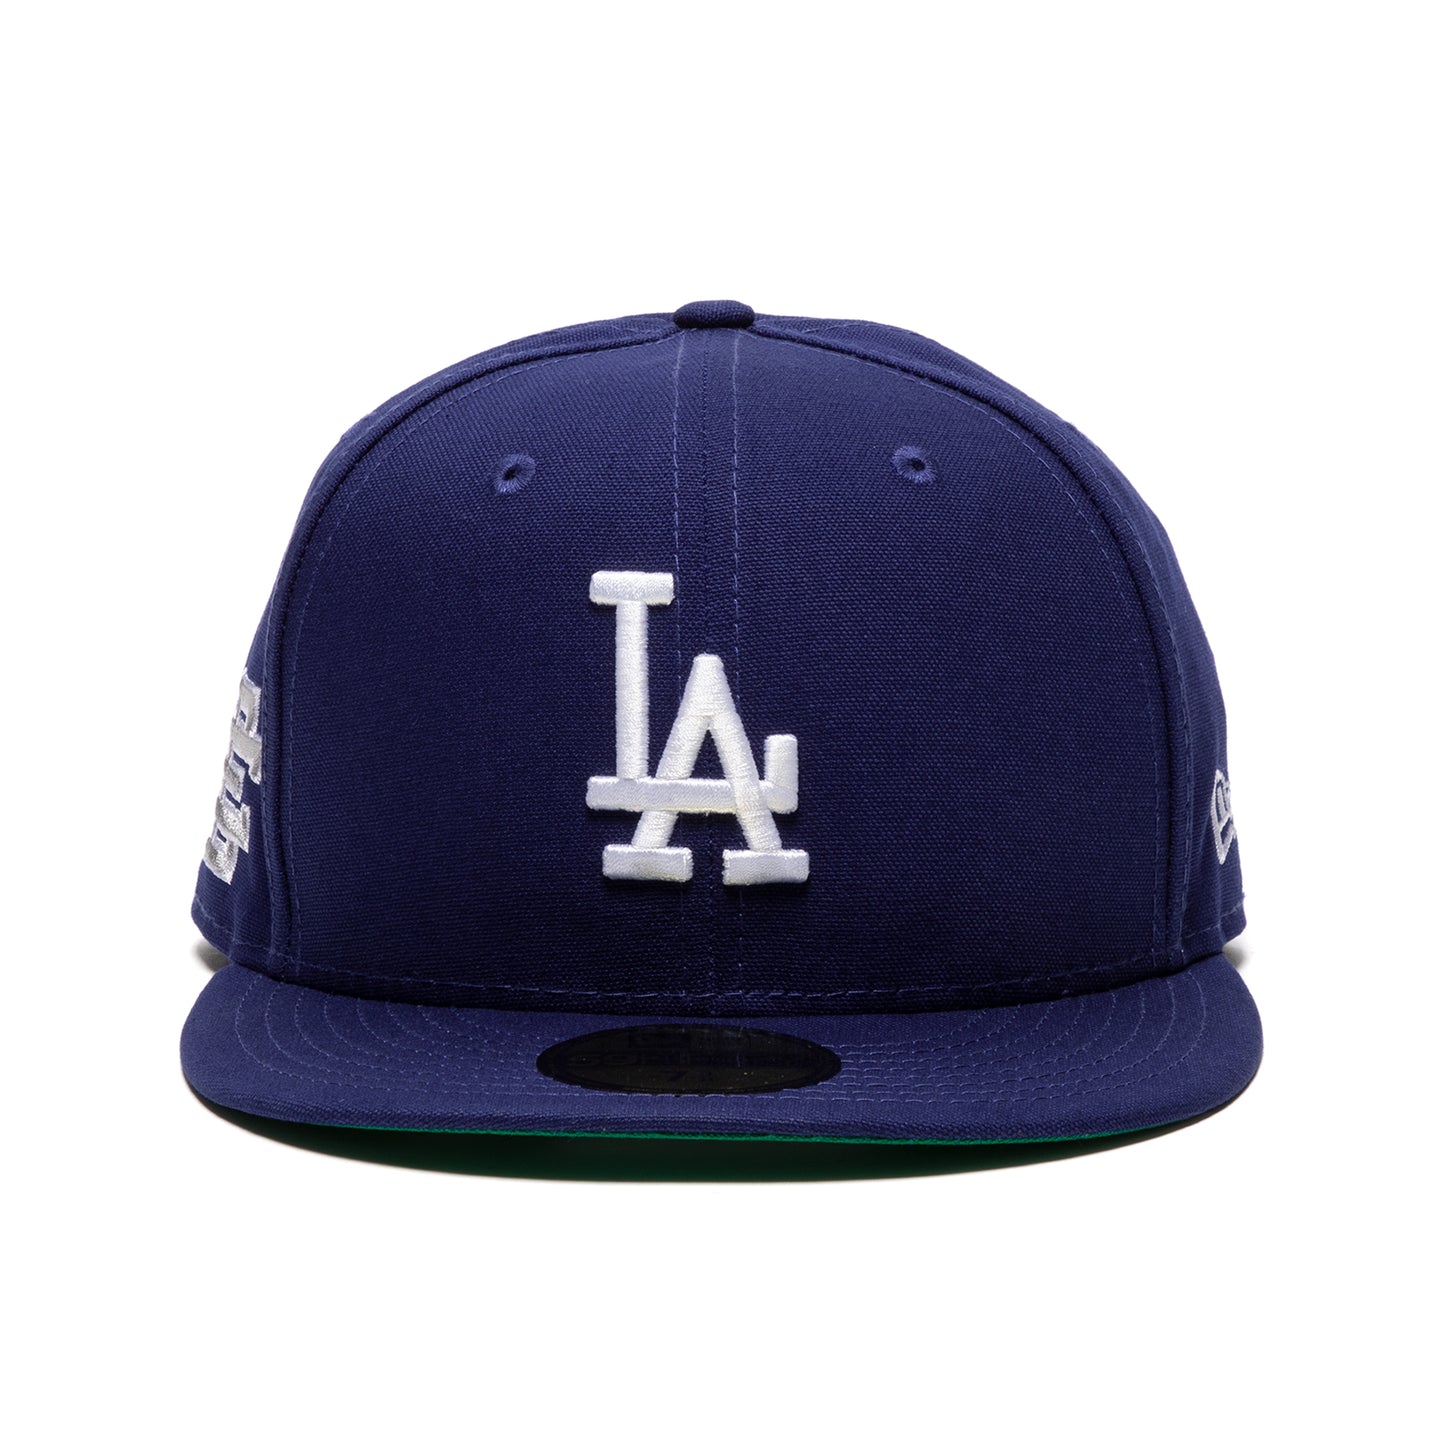 New Era x Eric Emanuel Los Angeles Dodgers Fitted Hat (Navy)